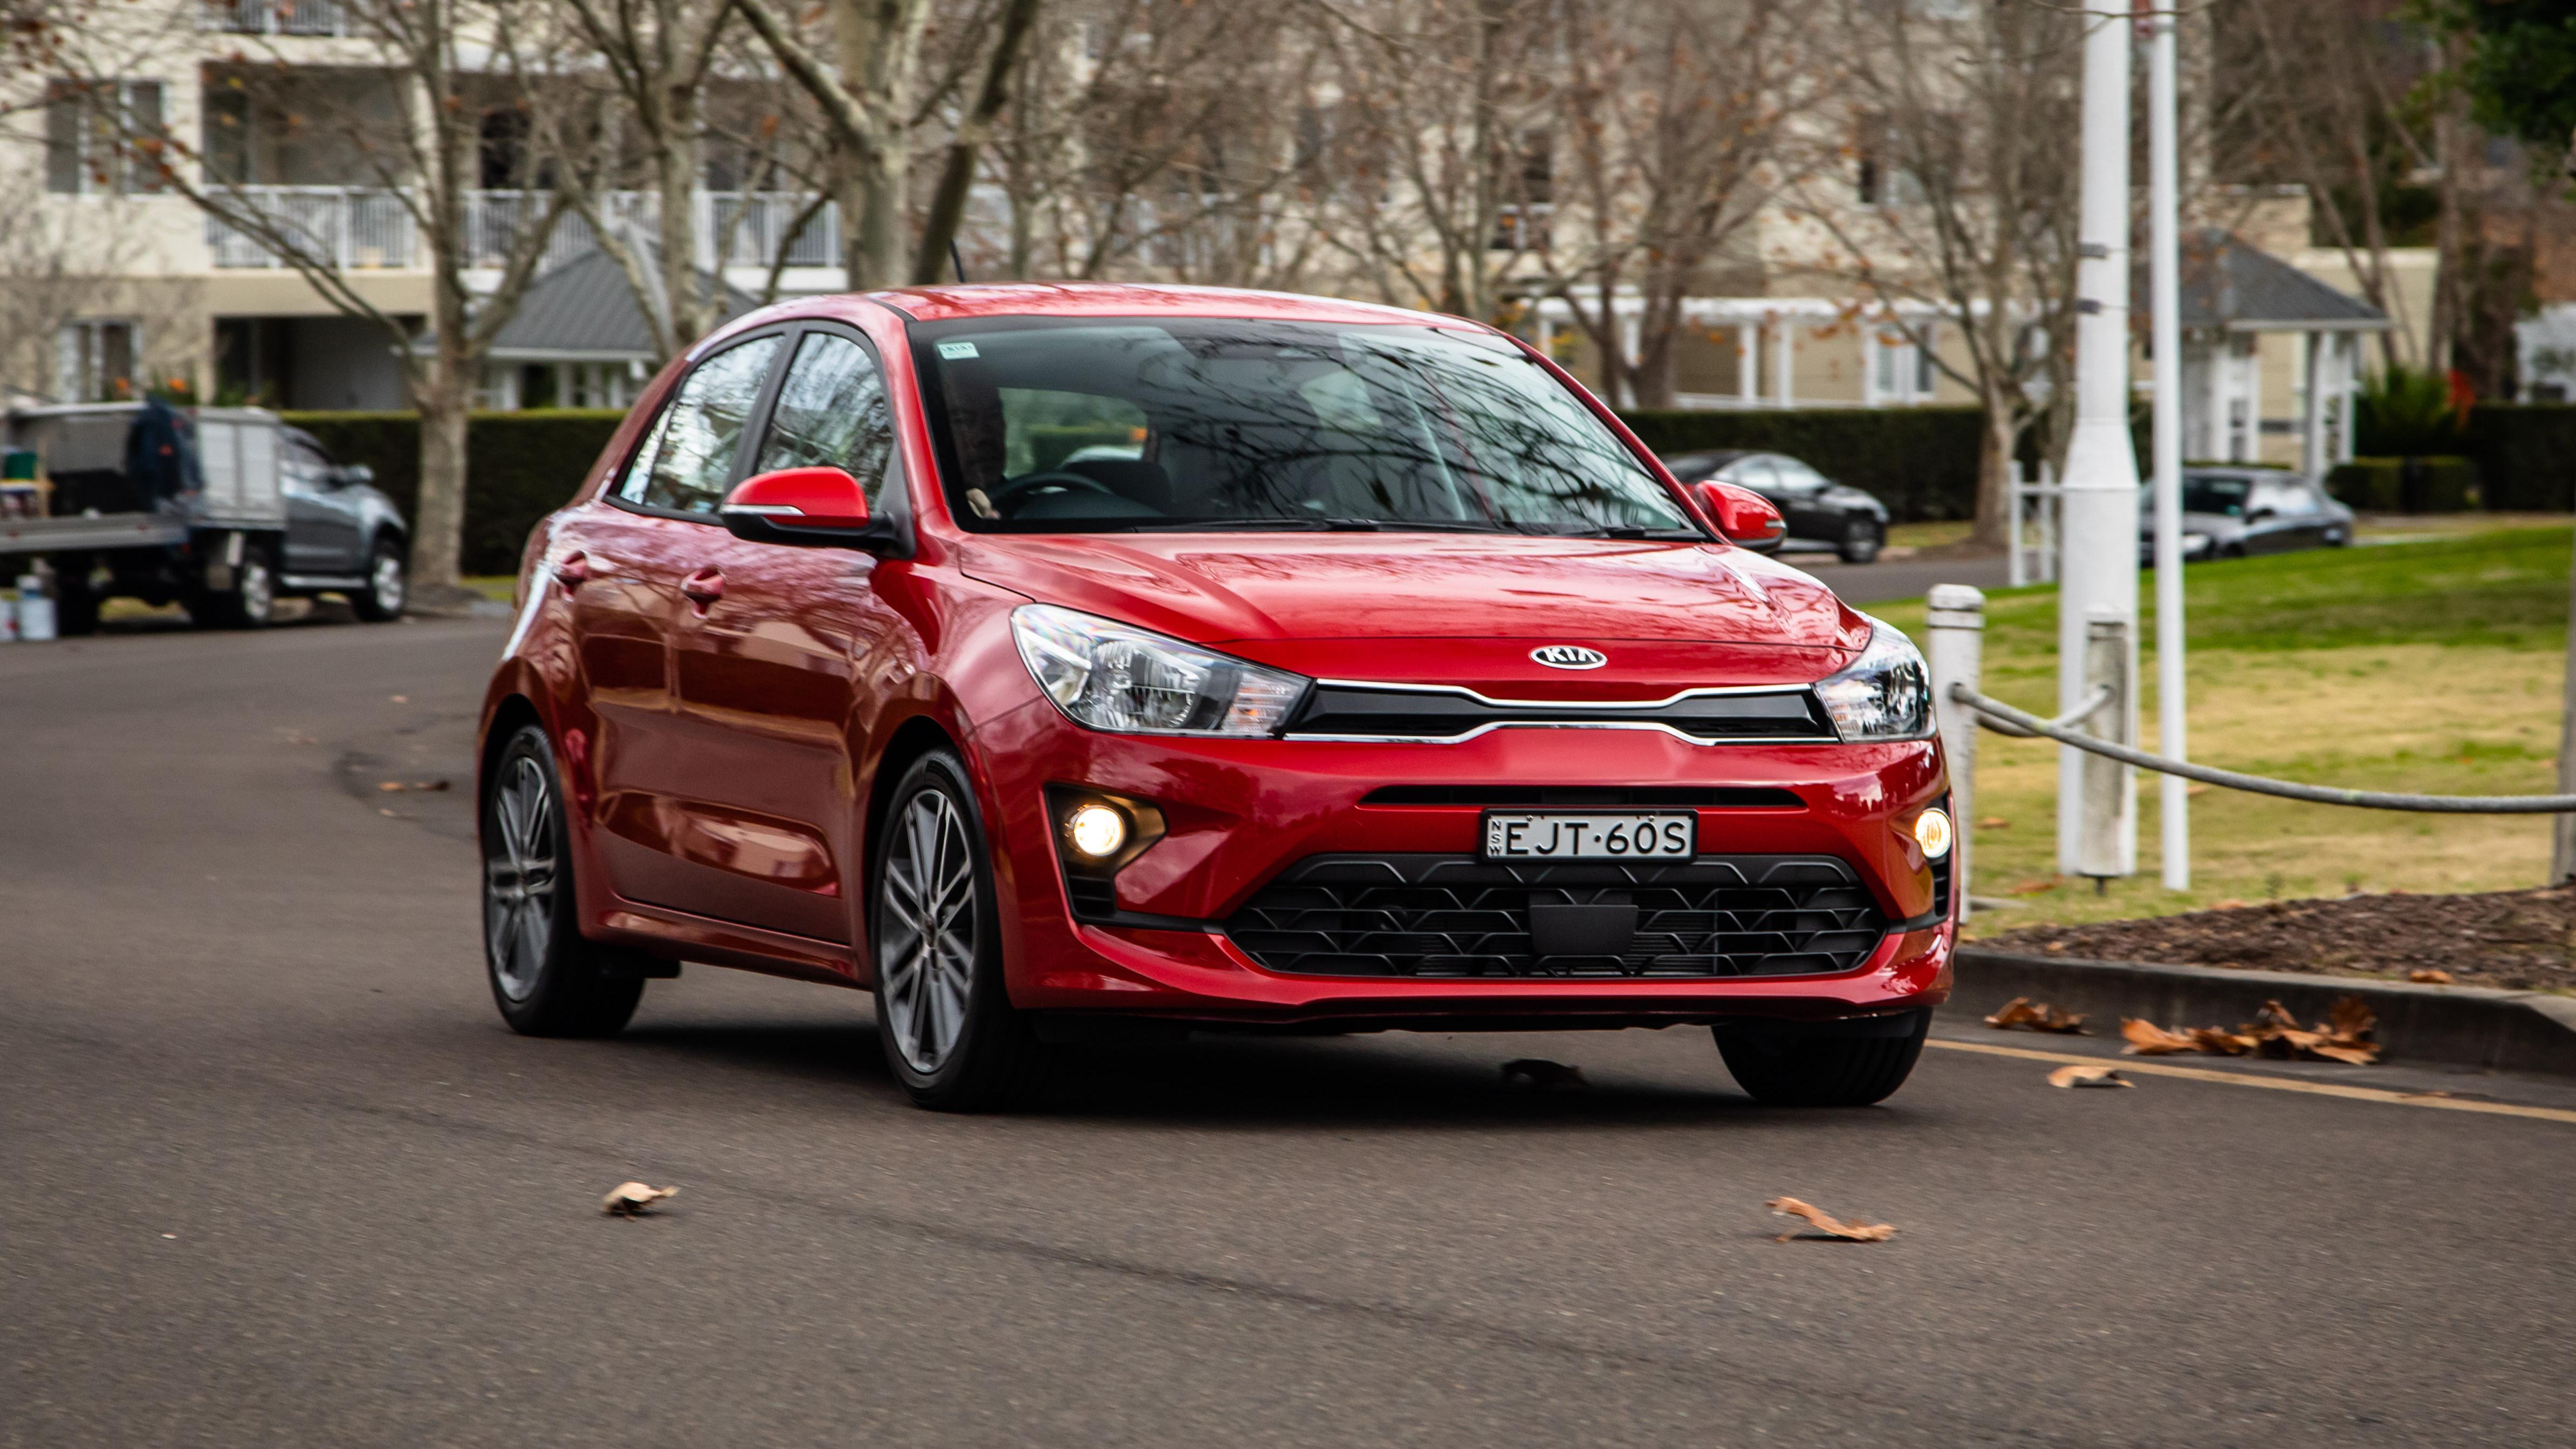 2021 Kia Rio Hatchback Review: Because It's Cheap and It Works